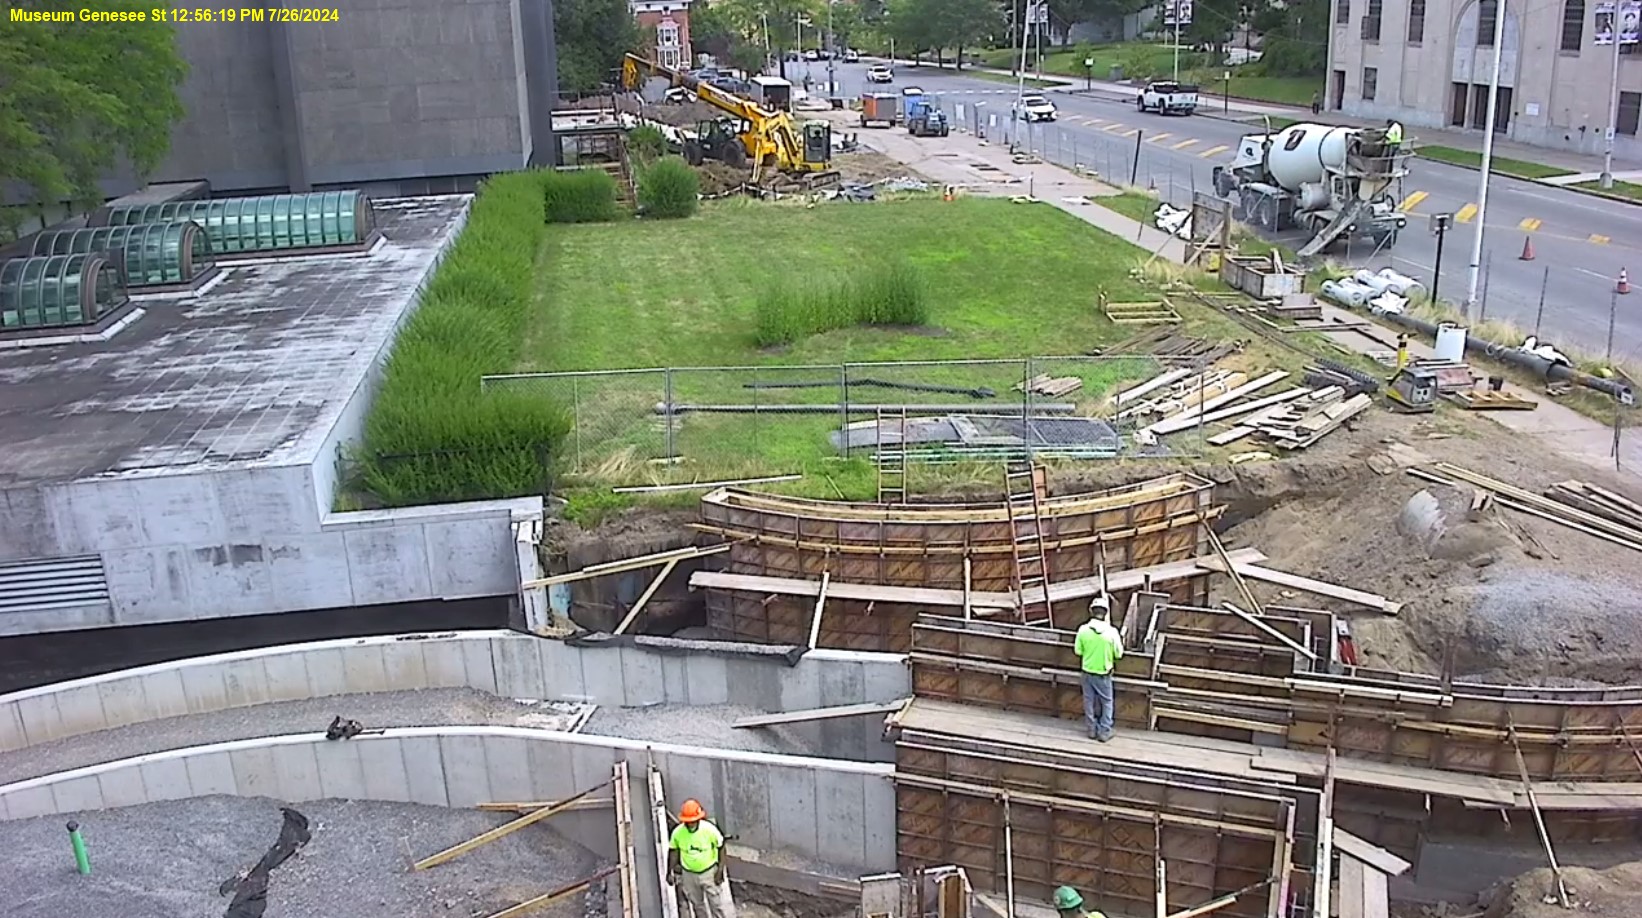 View of Genesee Street front lawn with the museum in the top left corner, the roof of the education wing middle of the left side, street on the right, and showing construction progress in the middle, the concrete sides of the ramp are in progress.